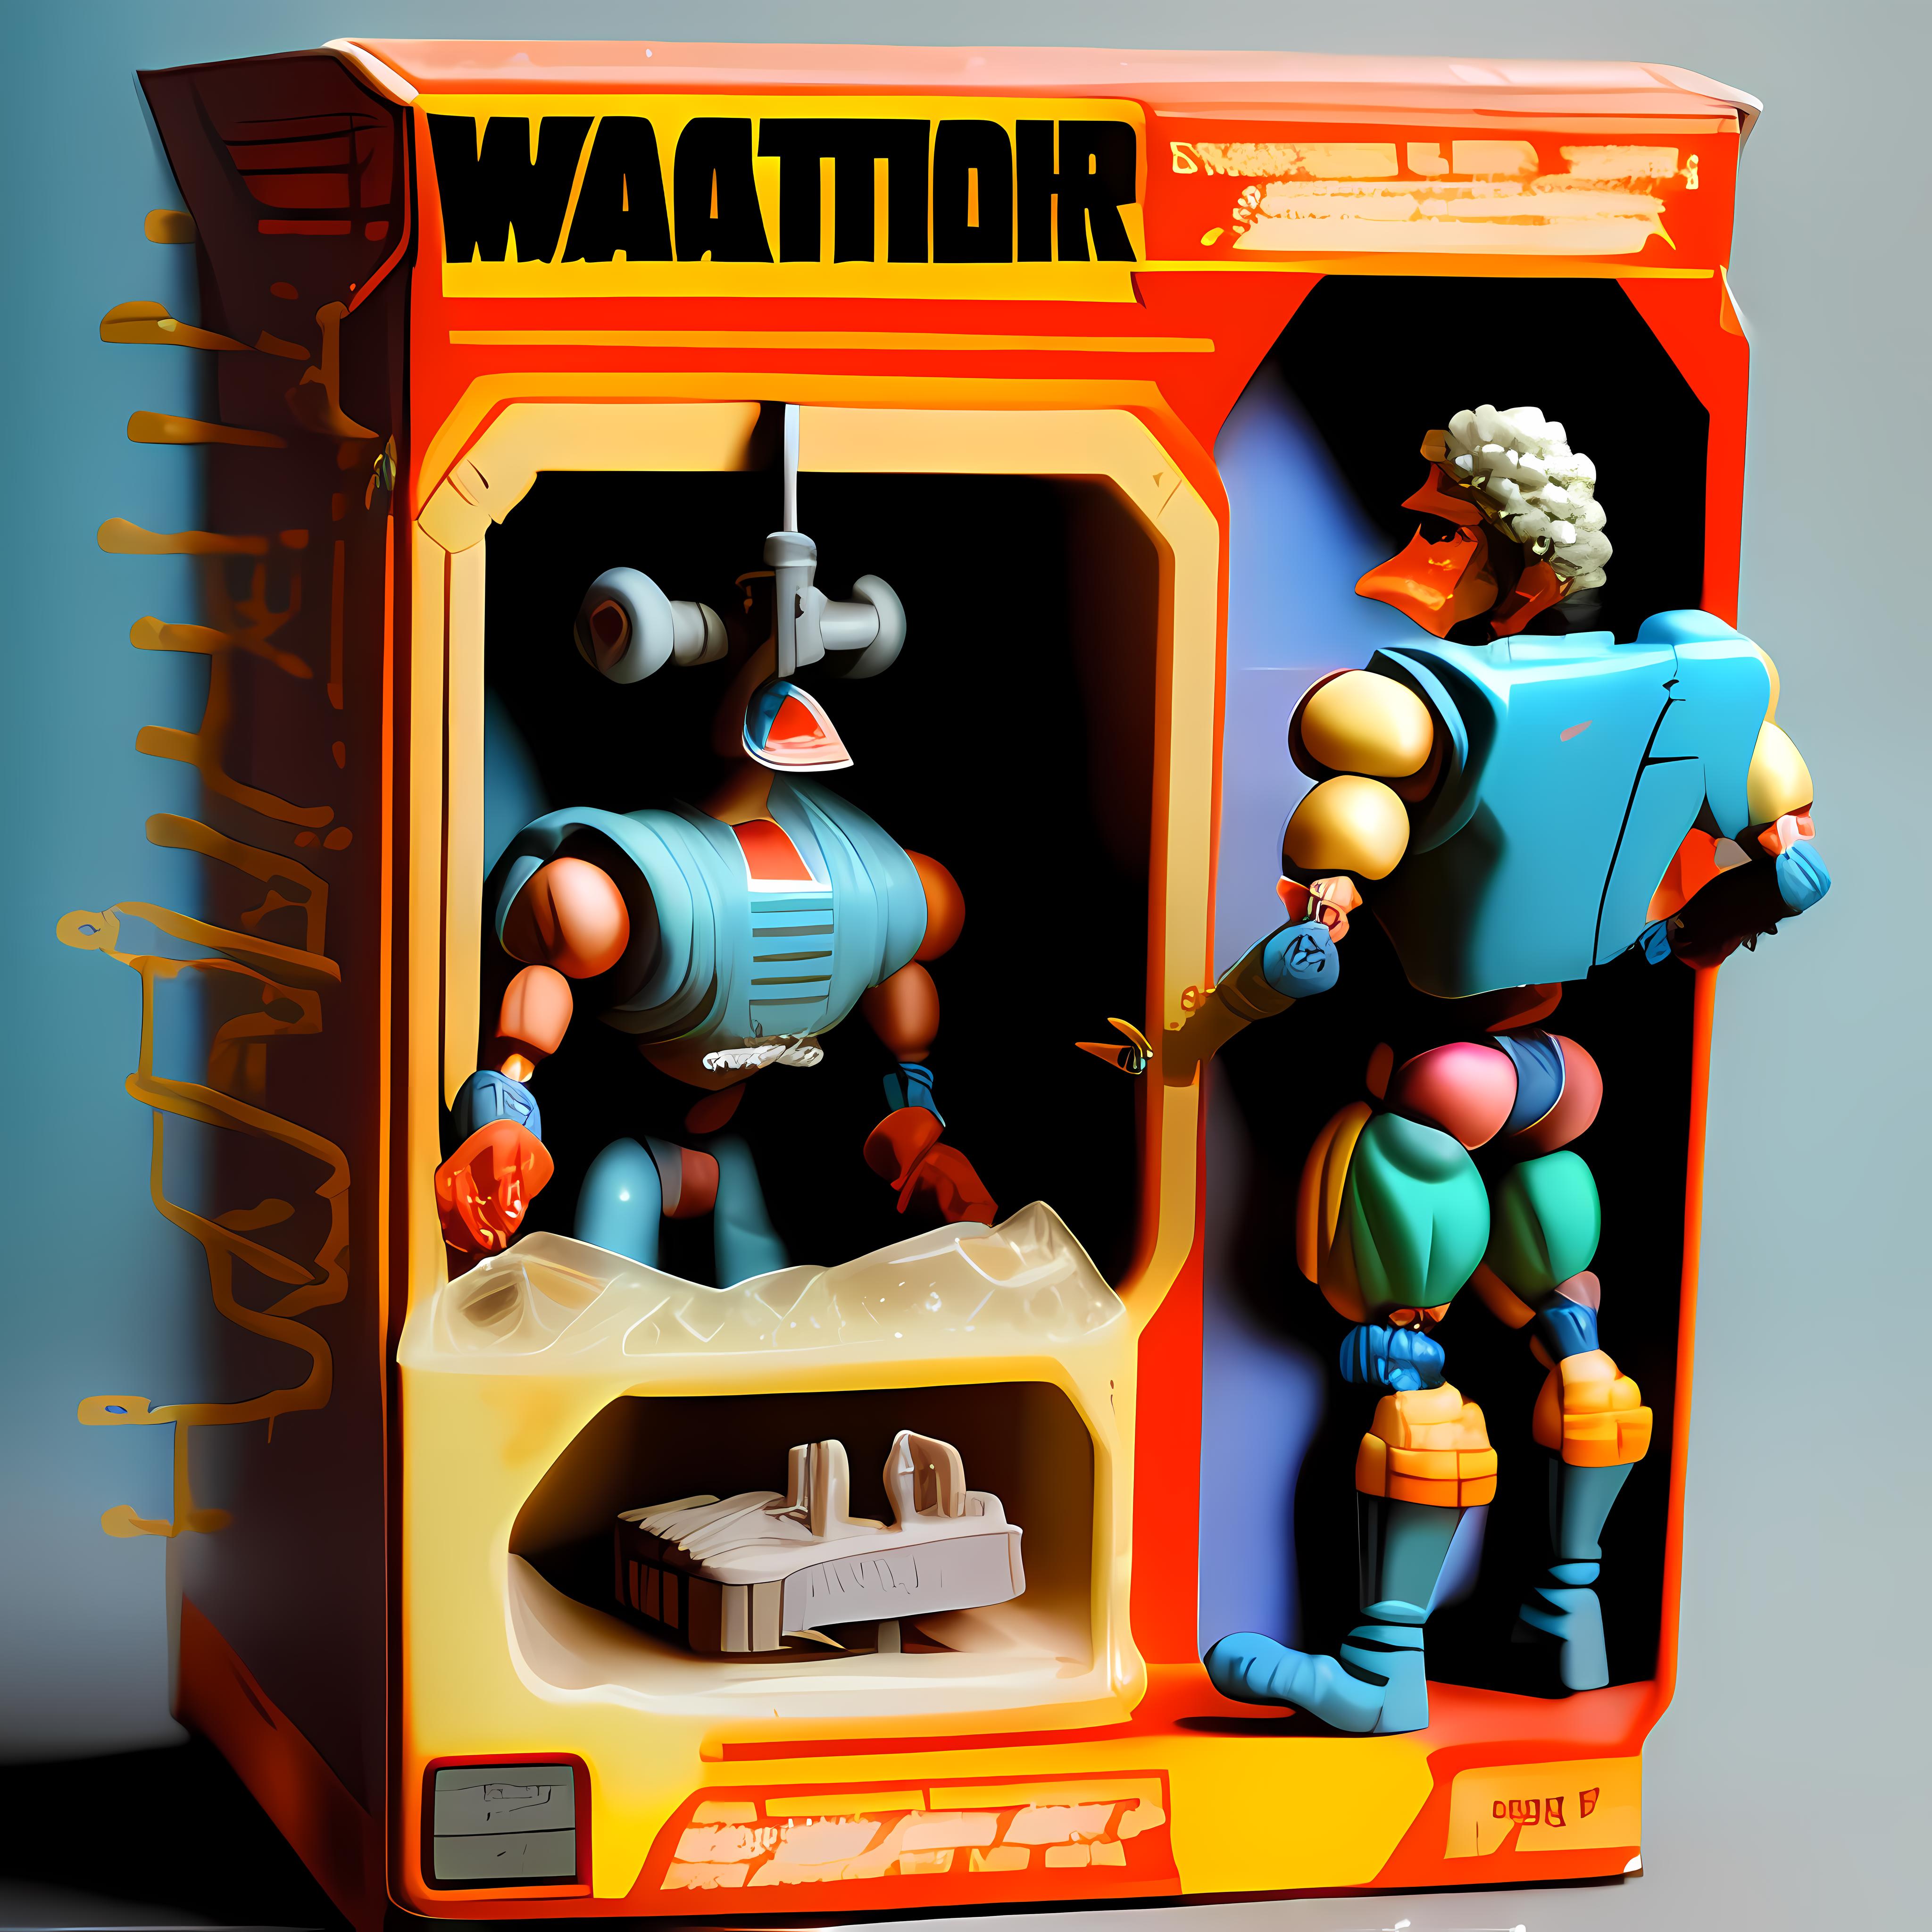 1987 Action Figure Playset Packaging image by Steeltron2000